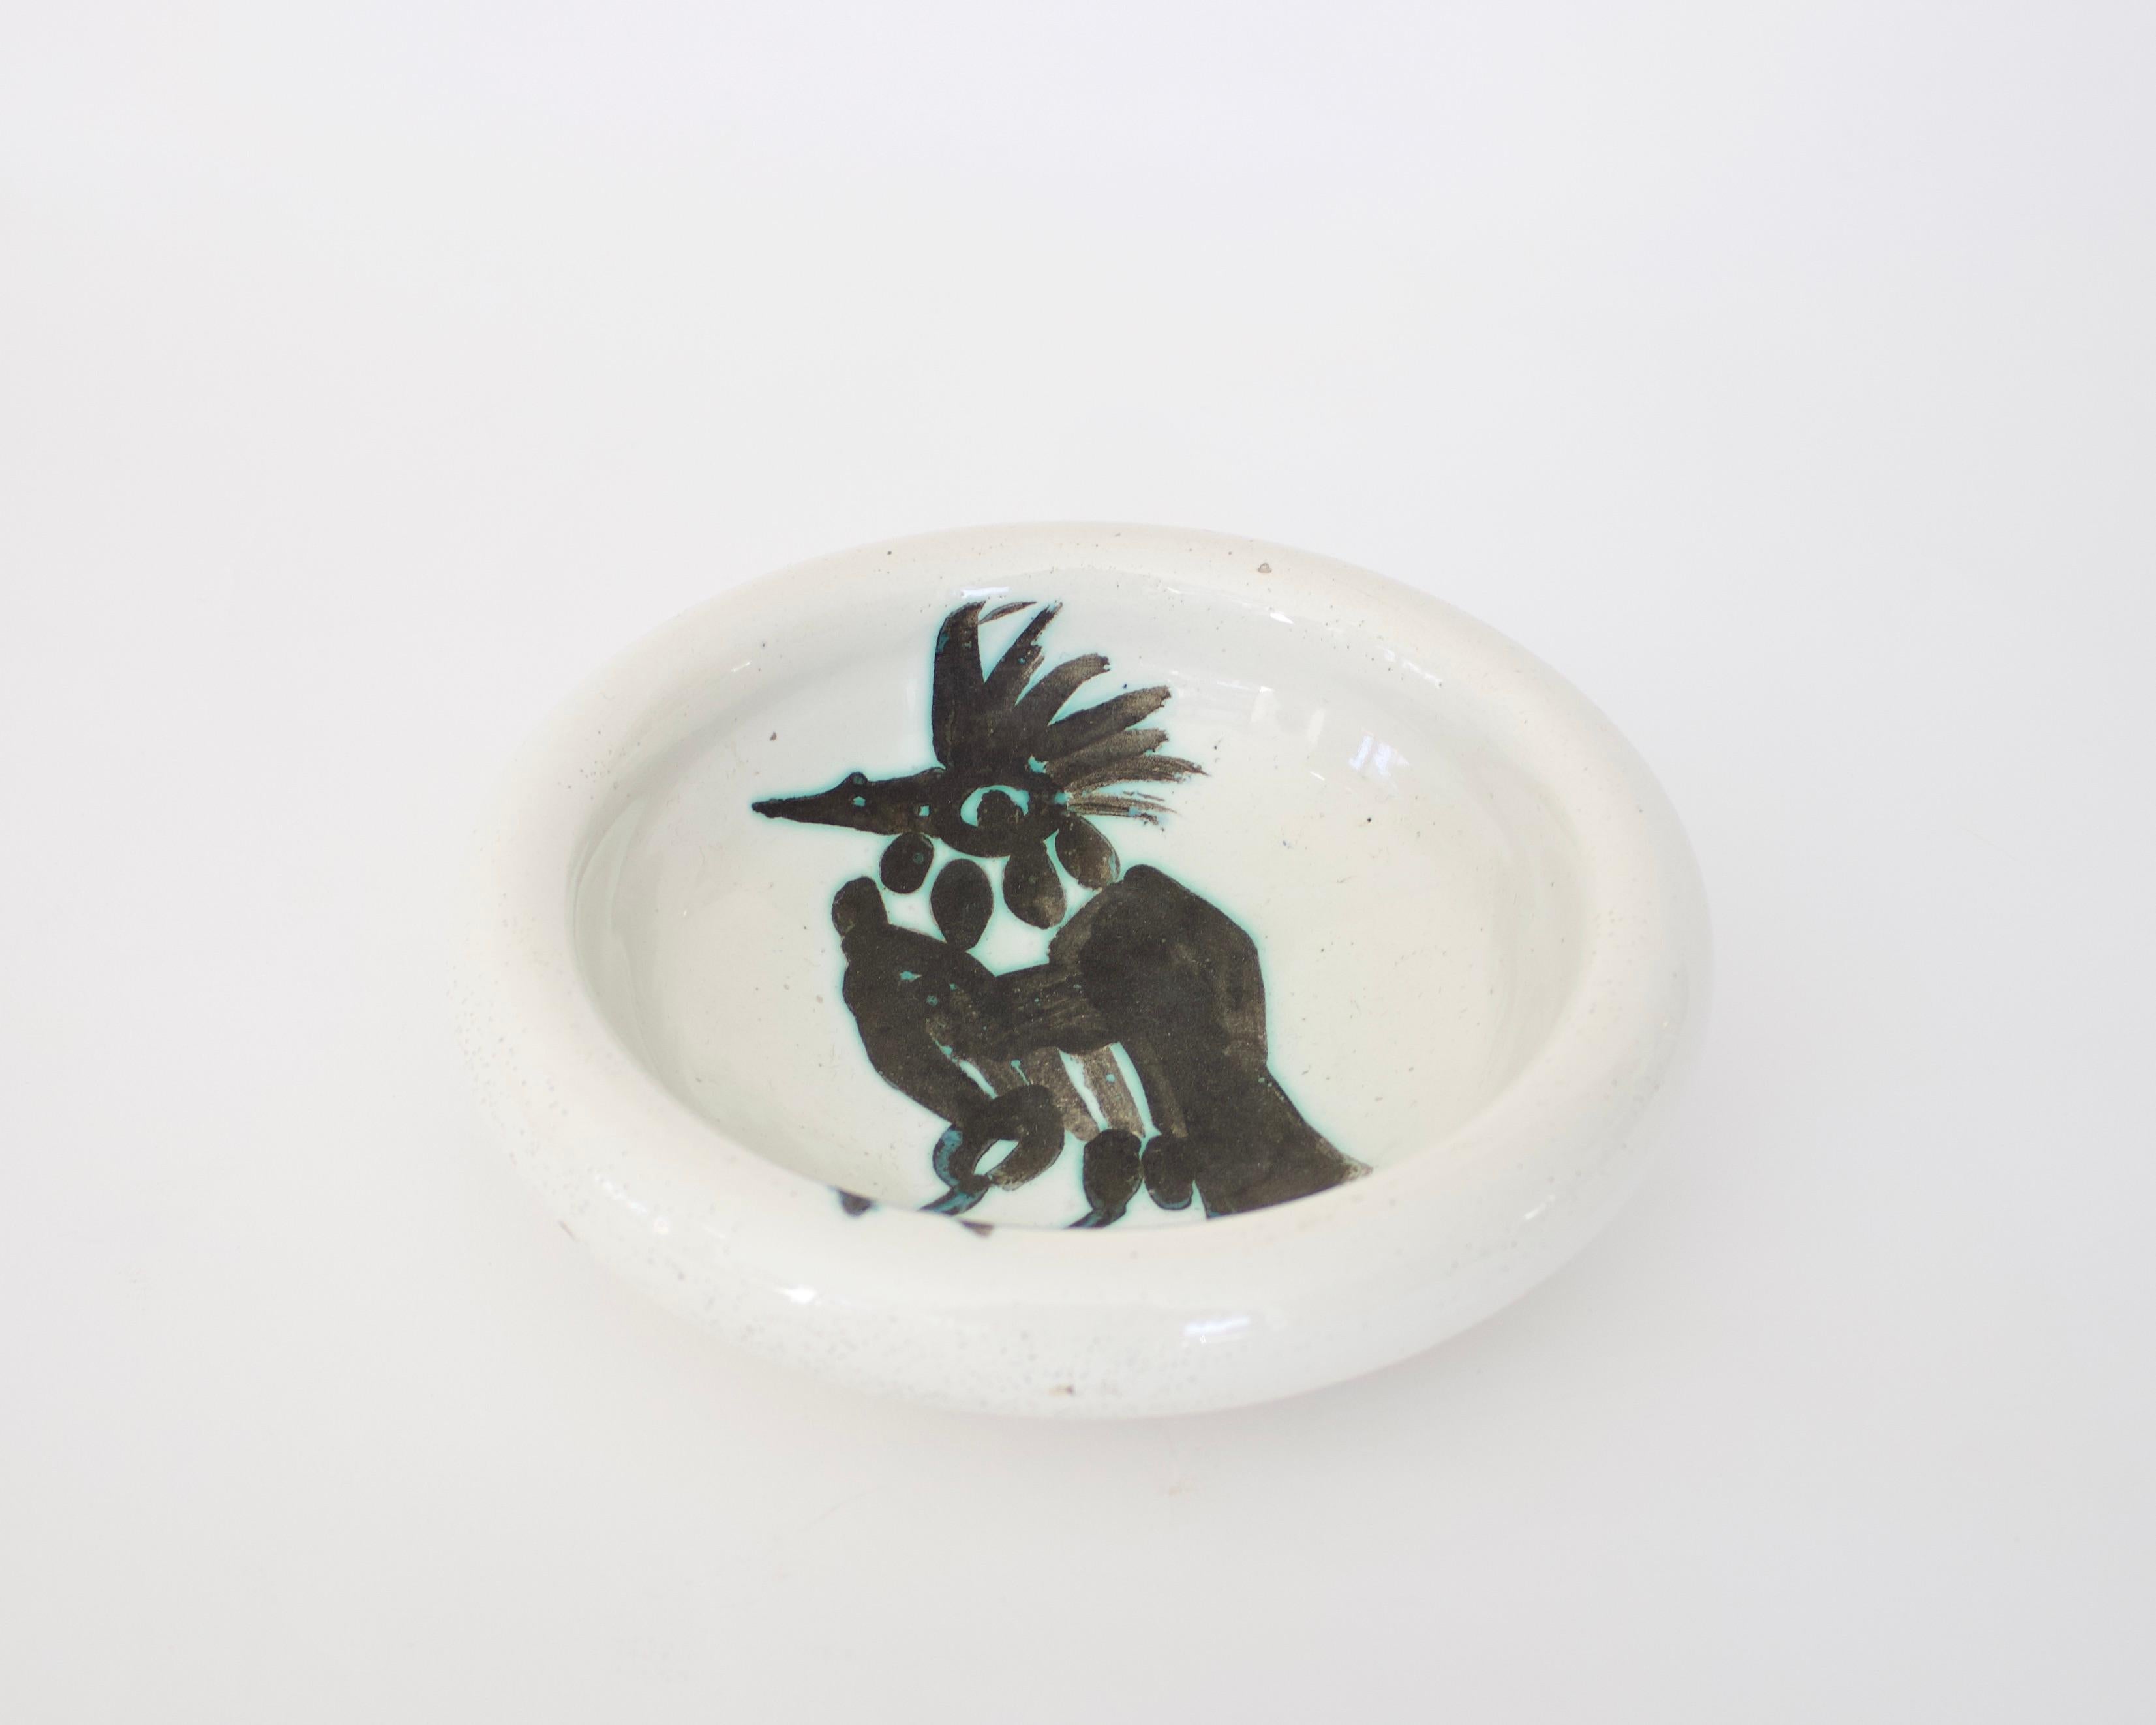 French Pablo Picasso Ceramic Dish Editions Picasso Madoura Bird Tuft Pointy Beak C 1952 For Sale